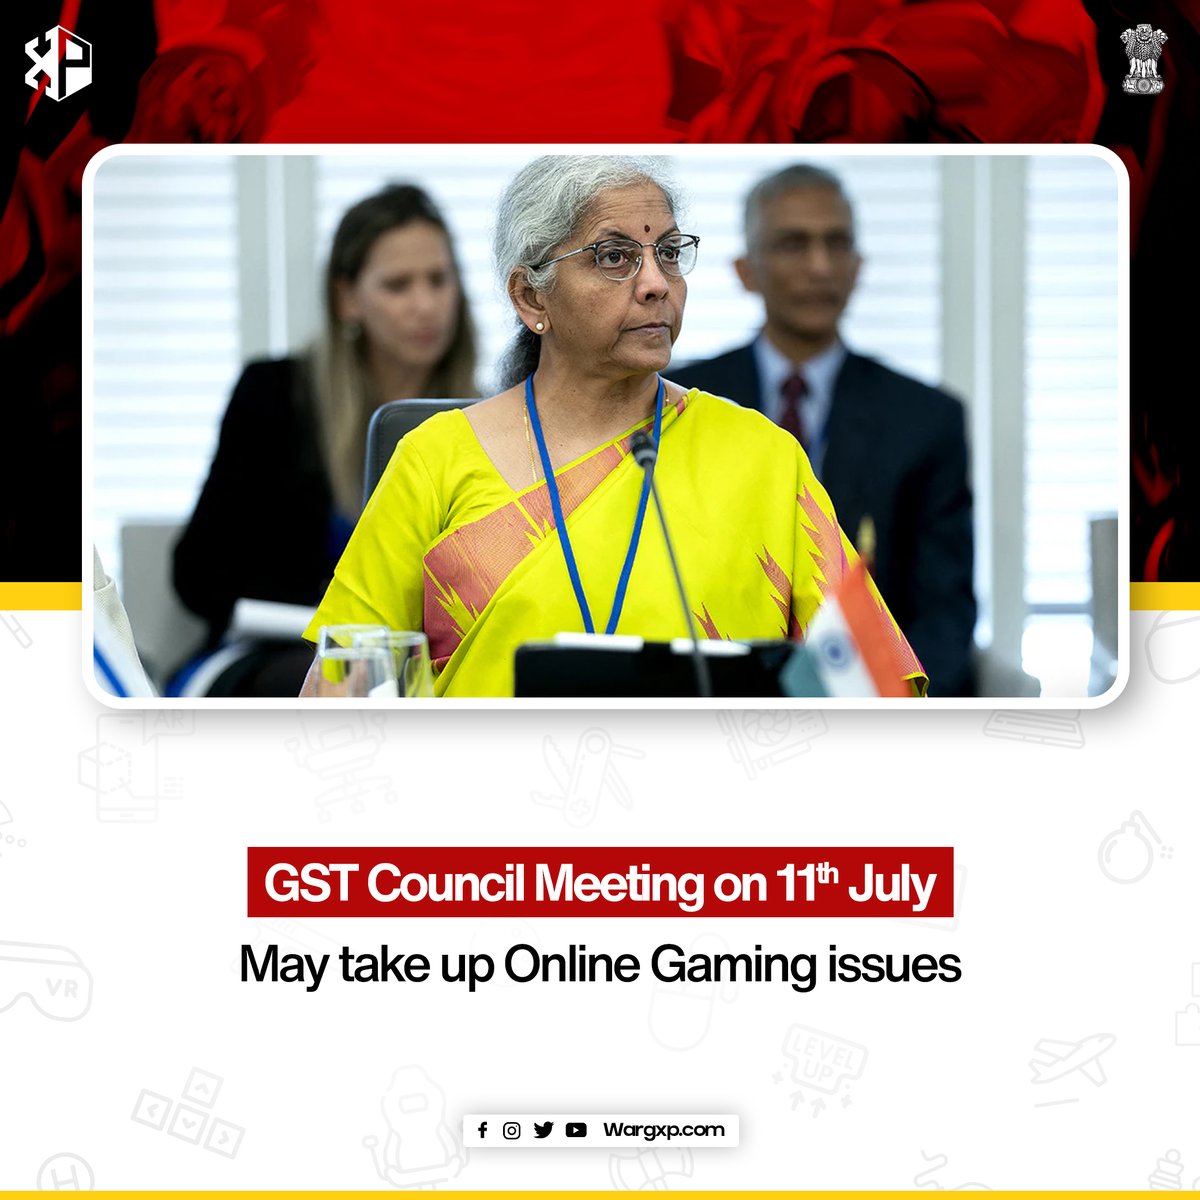 GST Council Meeting on 11th July May Take Up Online Gaming Issues

#wargxp #esports #gaming #news #memes #game #gamers #videogames #bgmi #pubg #gst #onlinegaming